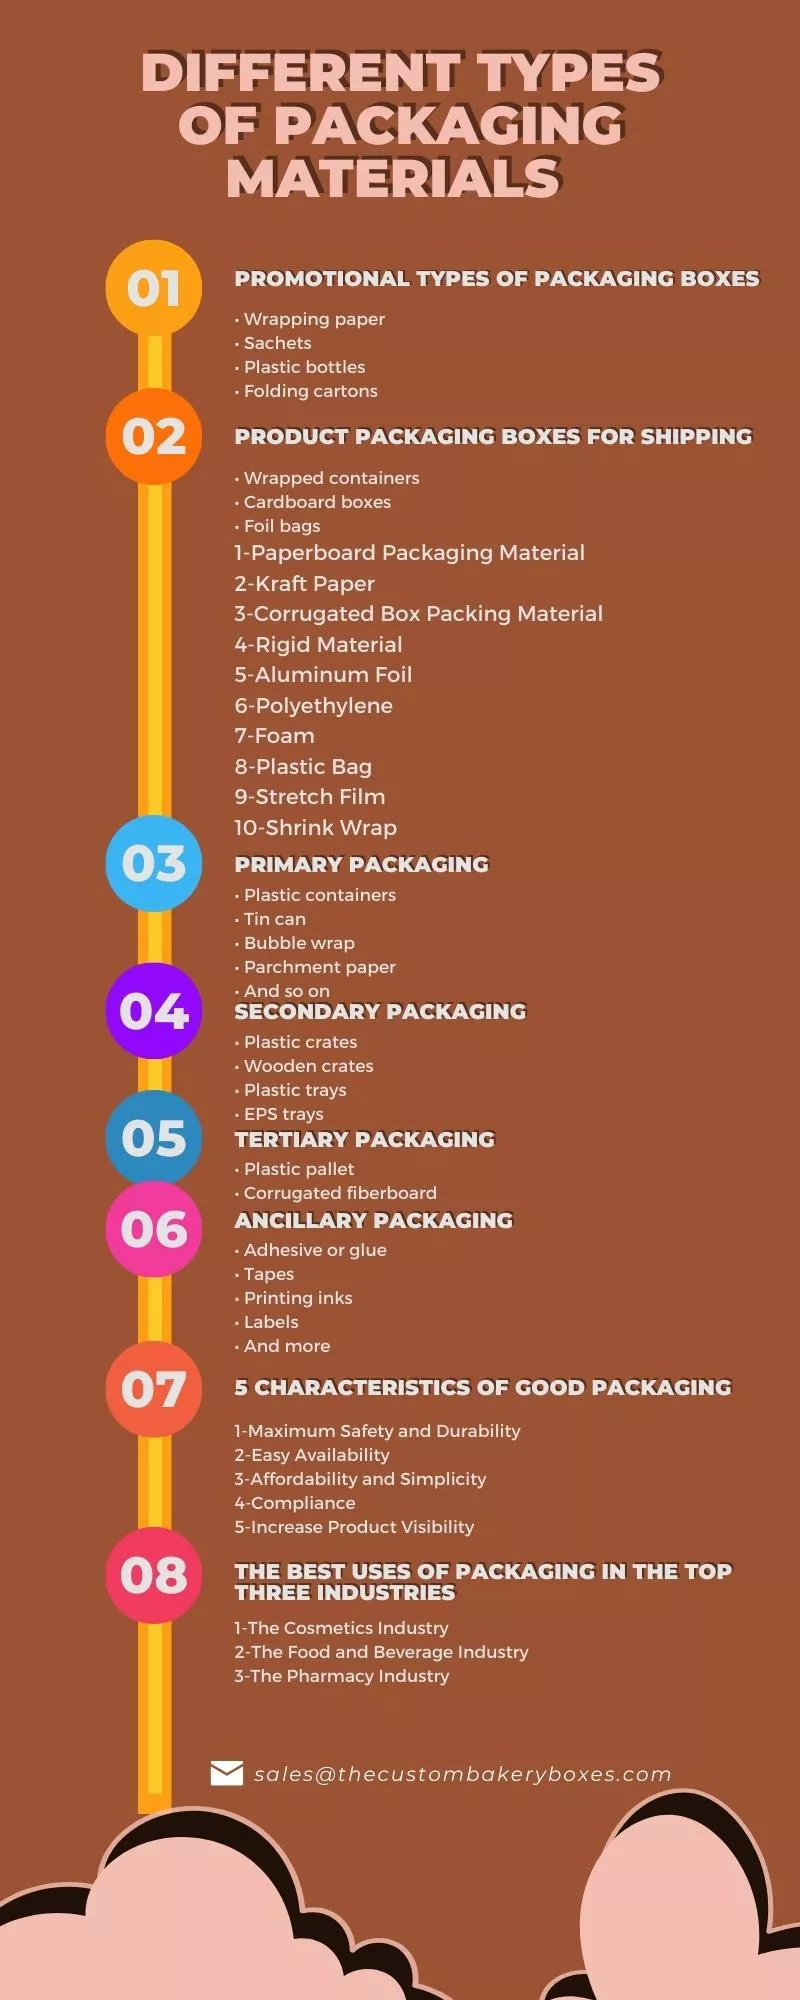 What is deafferent types of packaging material